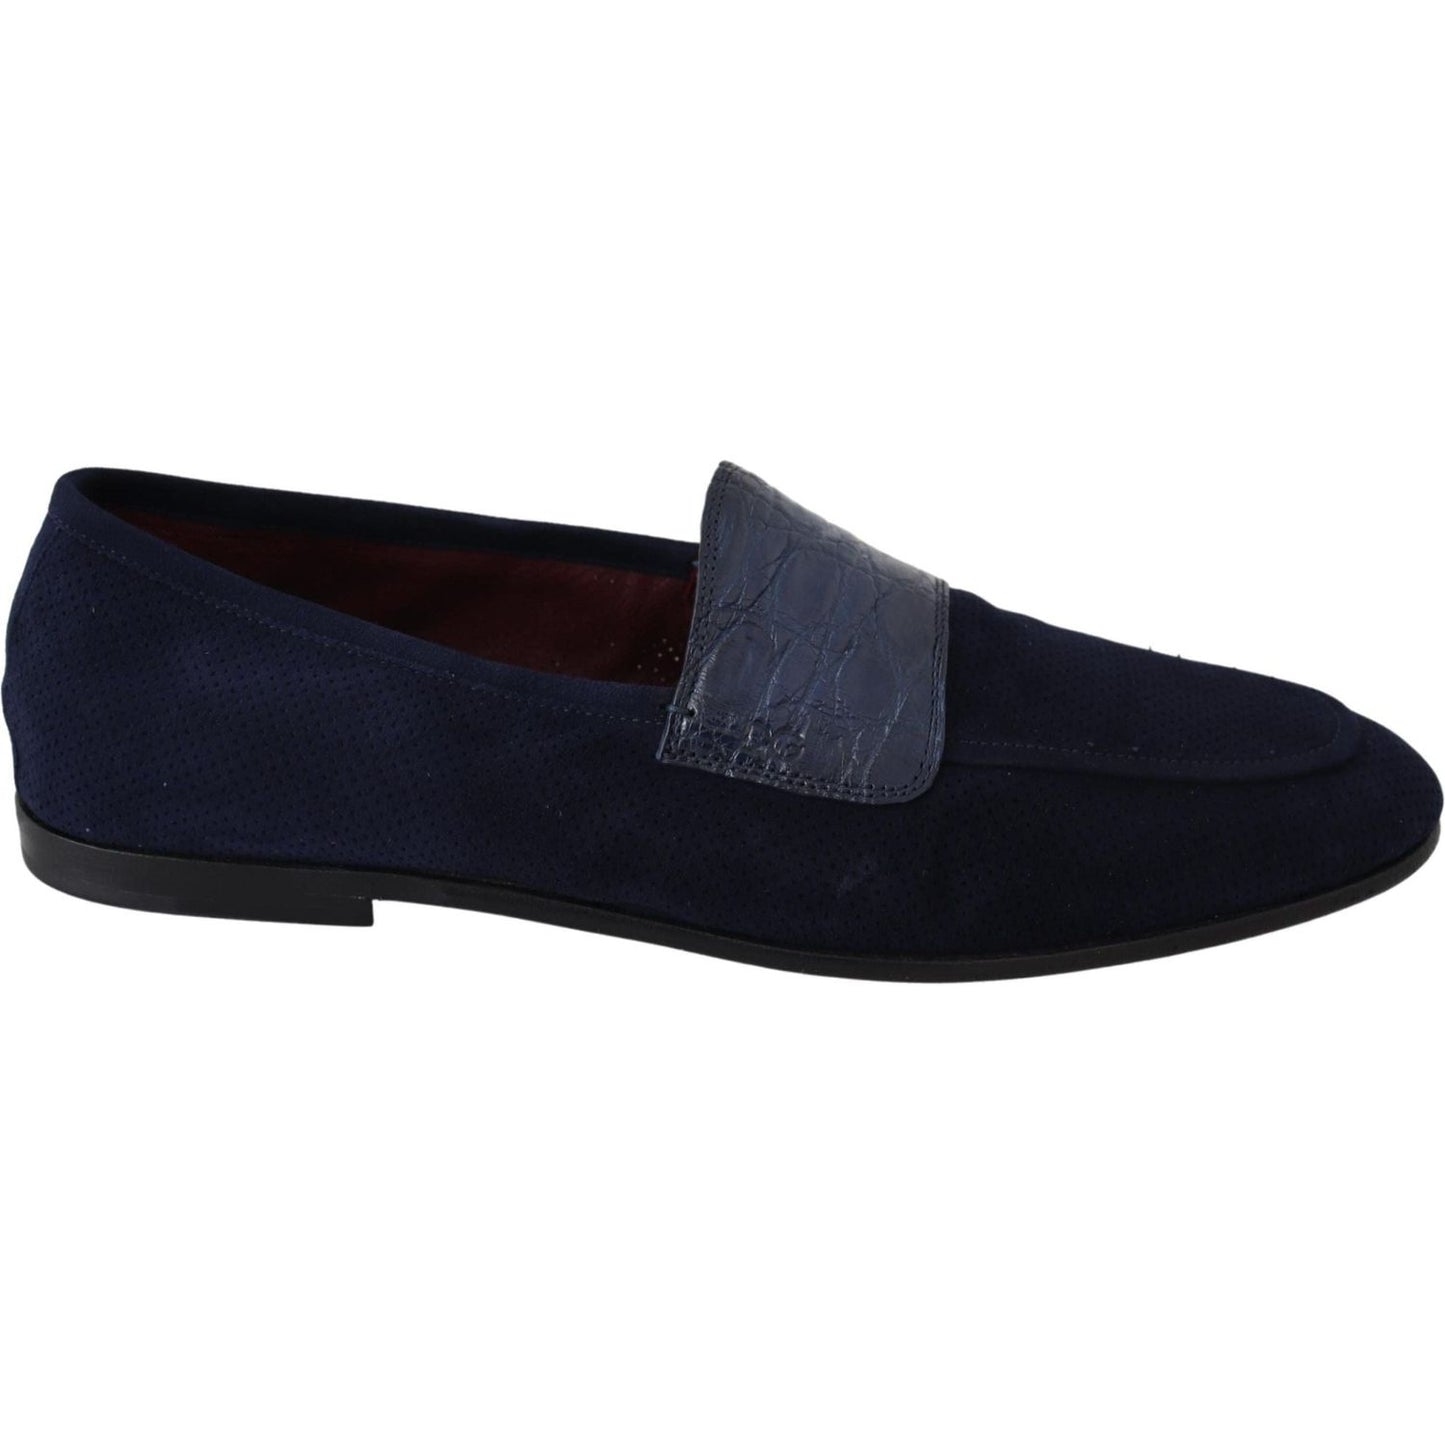 Dolce & Gabbana Elegant Blue Suede Leather Loafers blue-suede-caiman-loafers-slippers-shoes IMG_1582-scaled-7348604d-a07.jpg